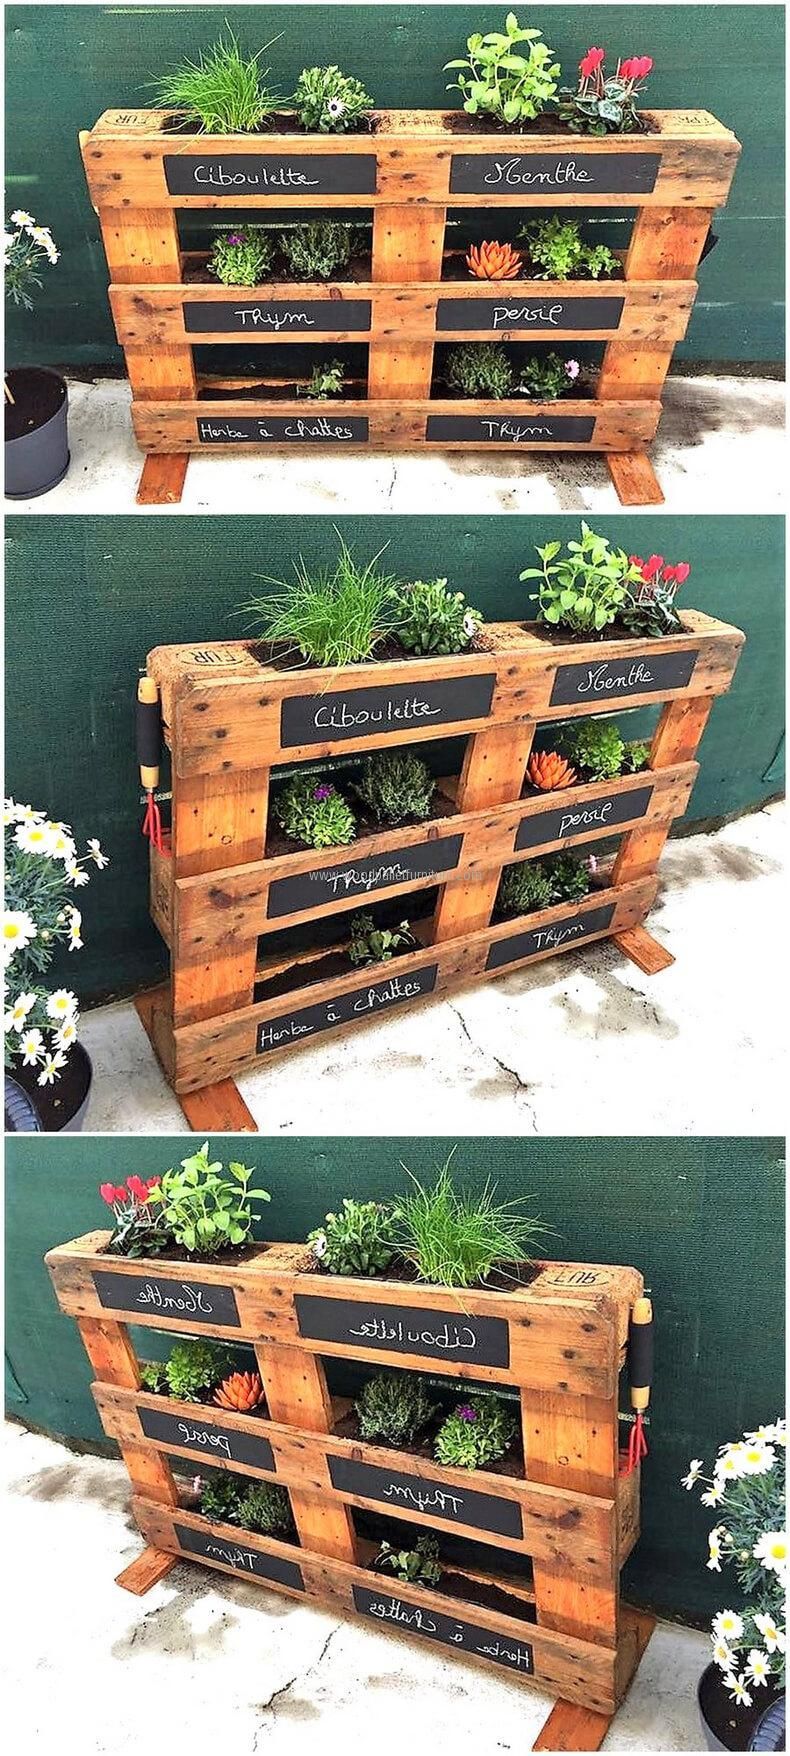 We have shown the reclaimed wood pallet herb planter idea here with which one can decorate the home with the herbs and flowers